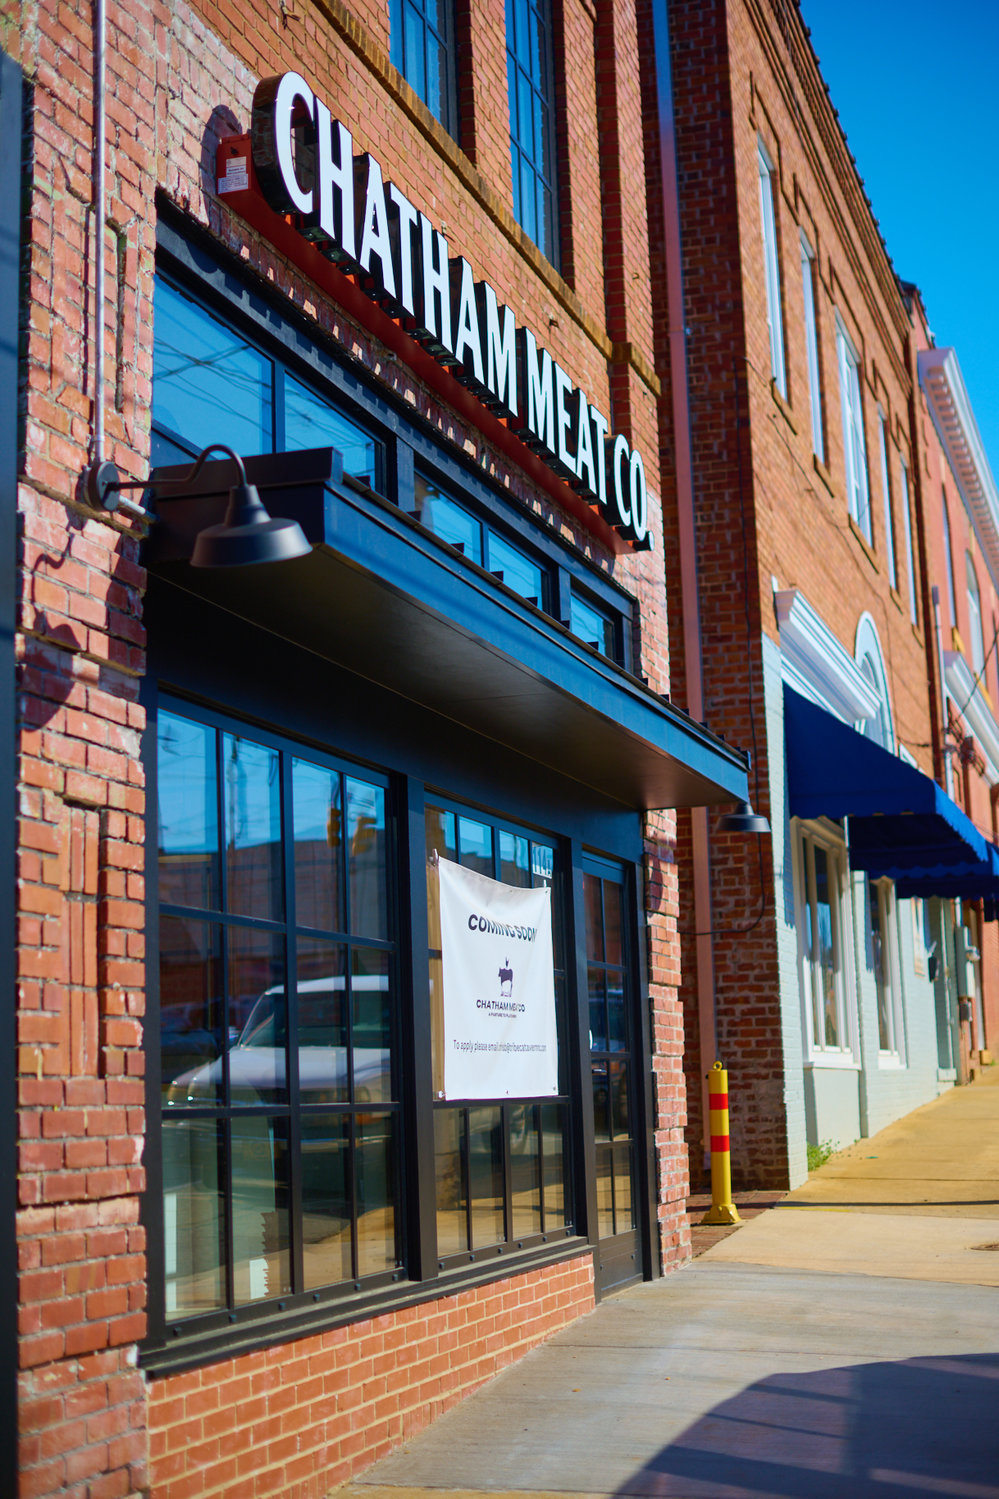 The storefront of the new Chatham Meat Company in downtown Siler City is part of a multi-million dollar revitalization project from Wren Industries.